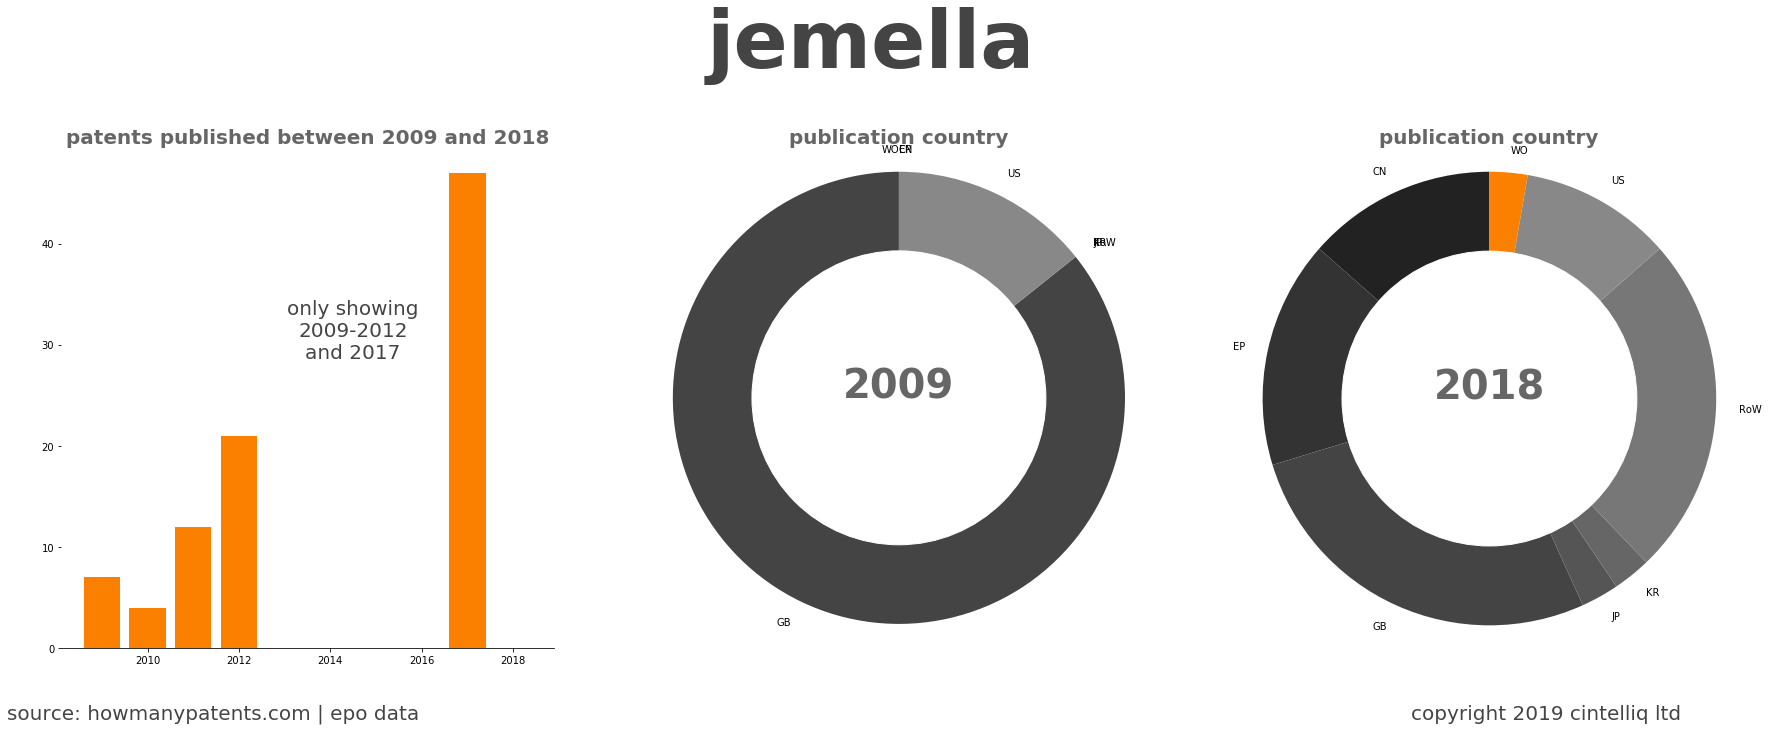 summary of patents for Jemella